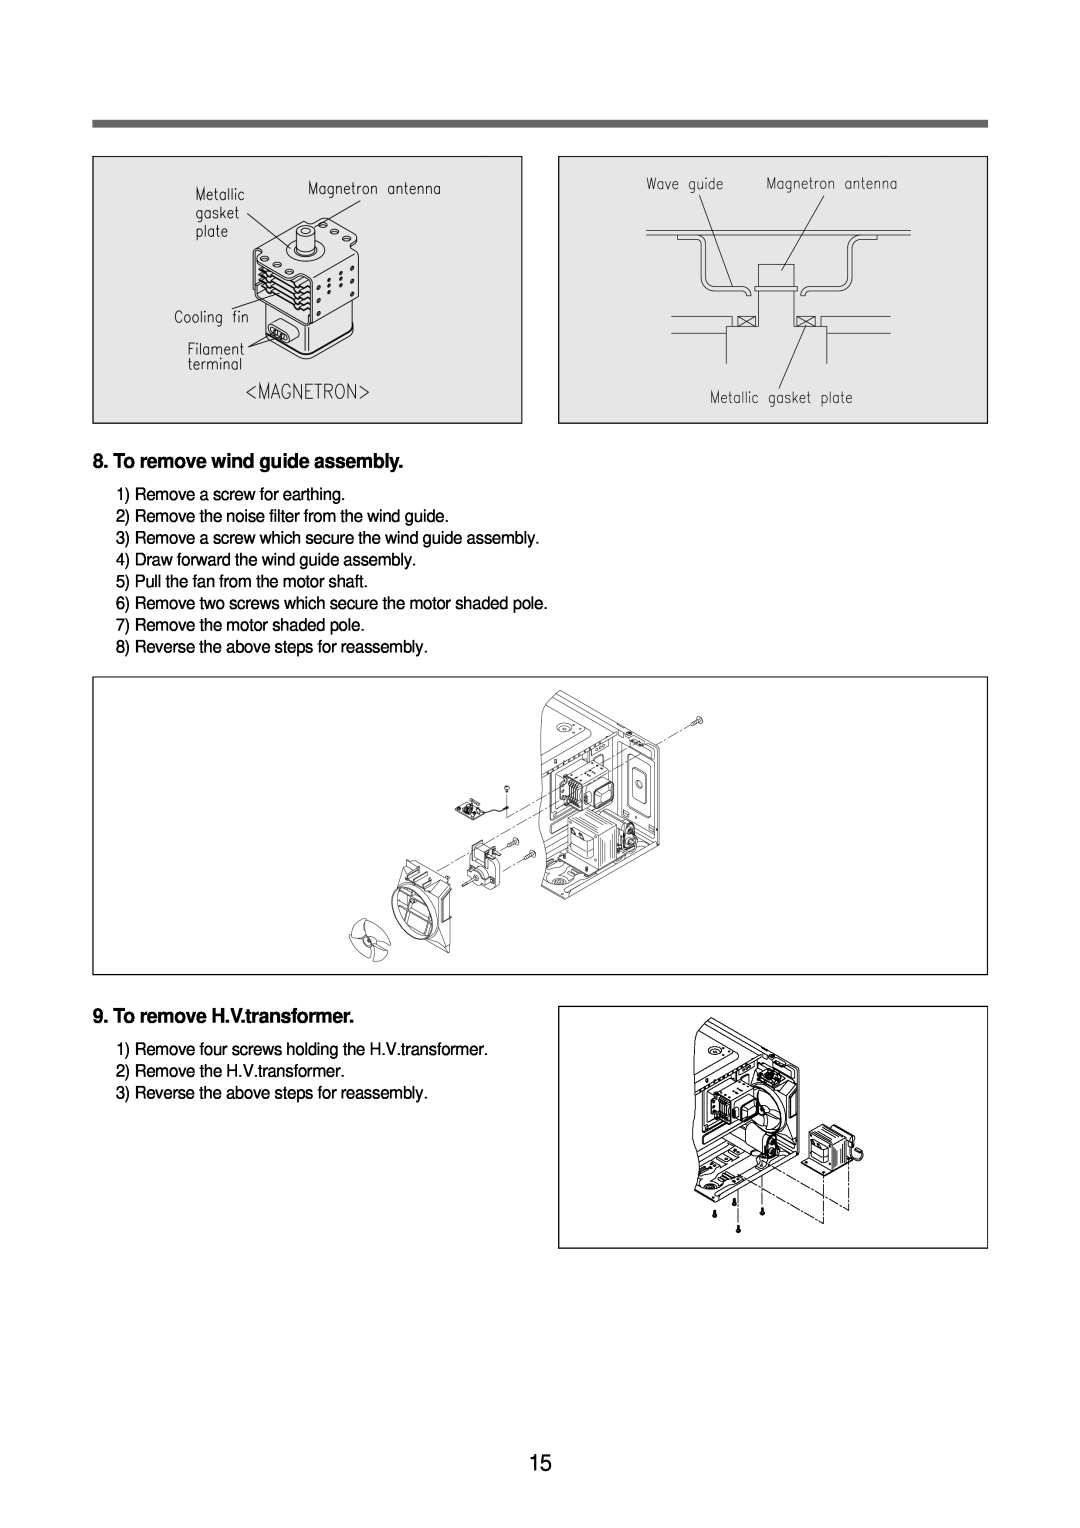 Daewoo KOR-63FB0S, KOR-63FB9S, KOR-63DB9S, KOR-63DB0S service manual To remove wind guide assembly, To remove H.V.transformer 